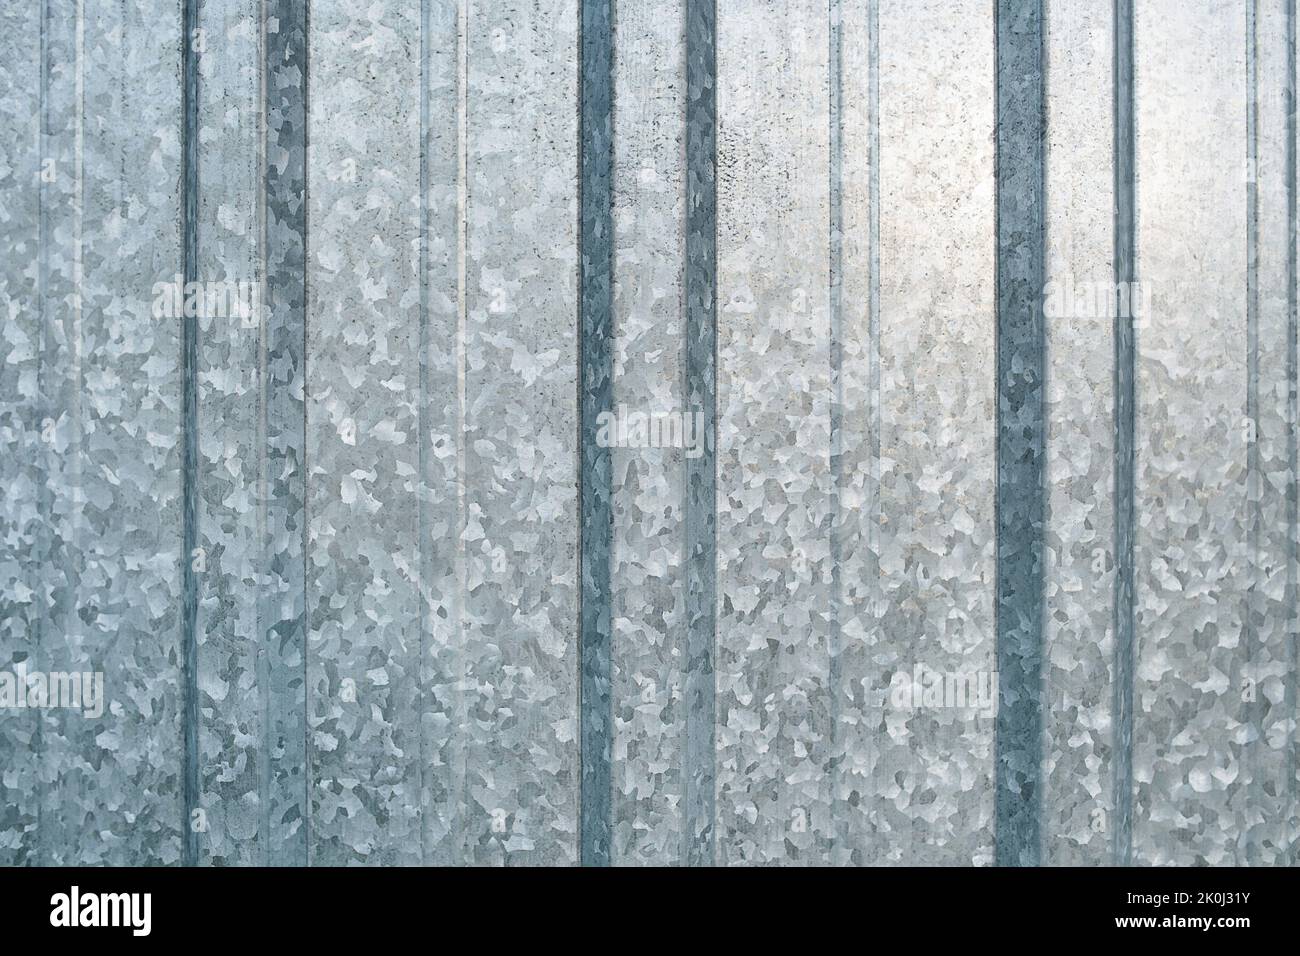 Stainless steel fence sheet texture close up. Raw unpainted with ridges and grooves Stock Photo